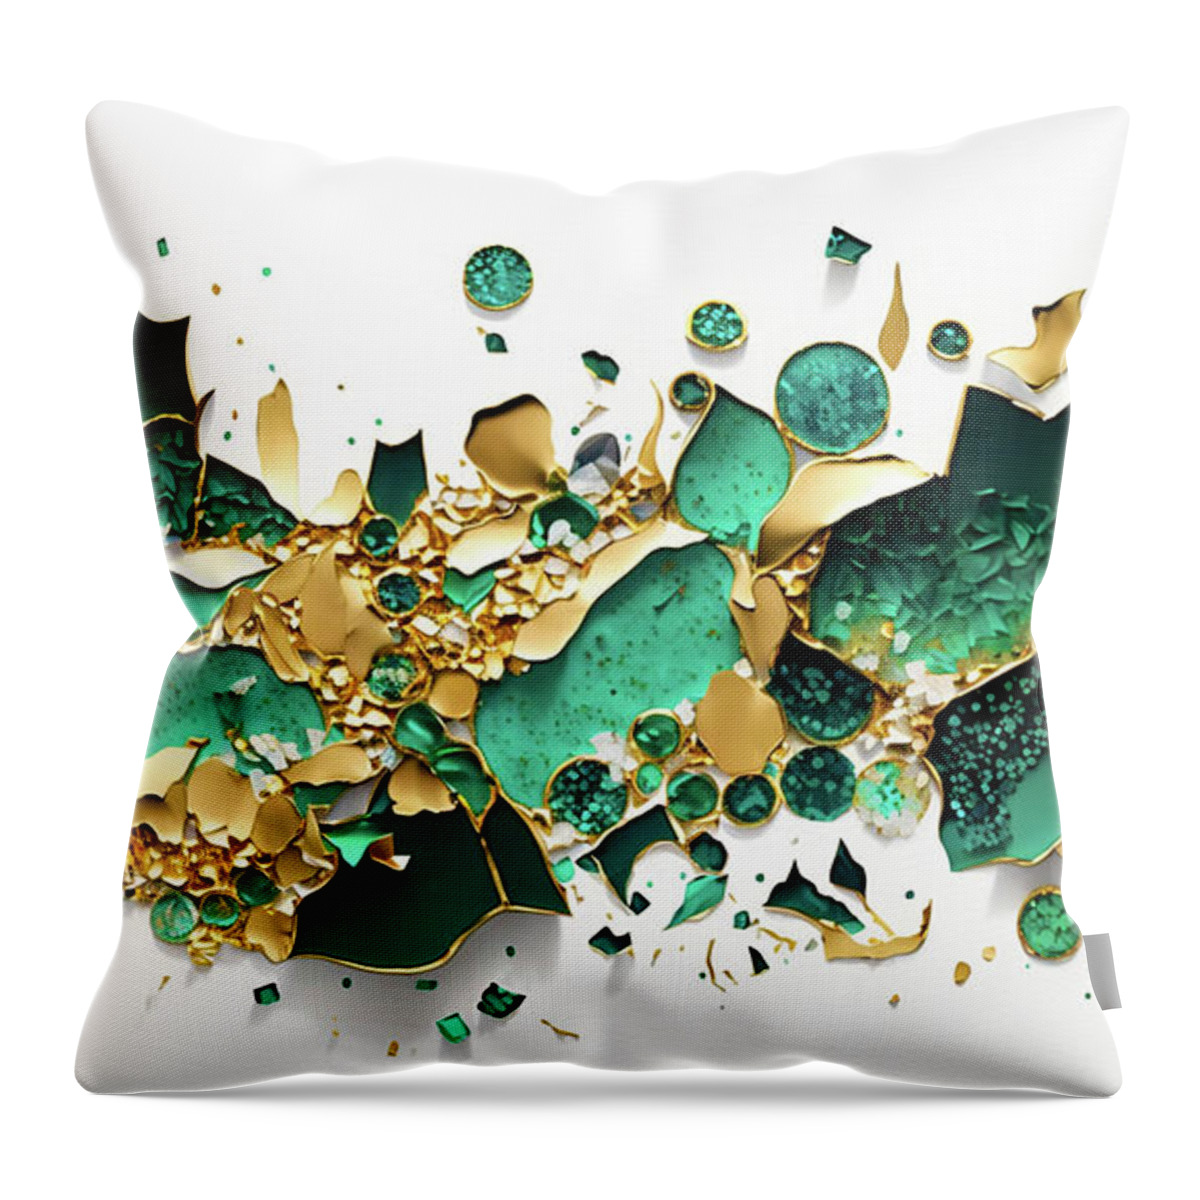 Torn Throw Pillow featuring the mixed media Dee Sea Dive by Glenn Robins